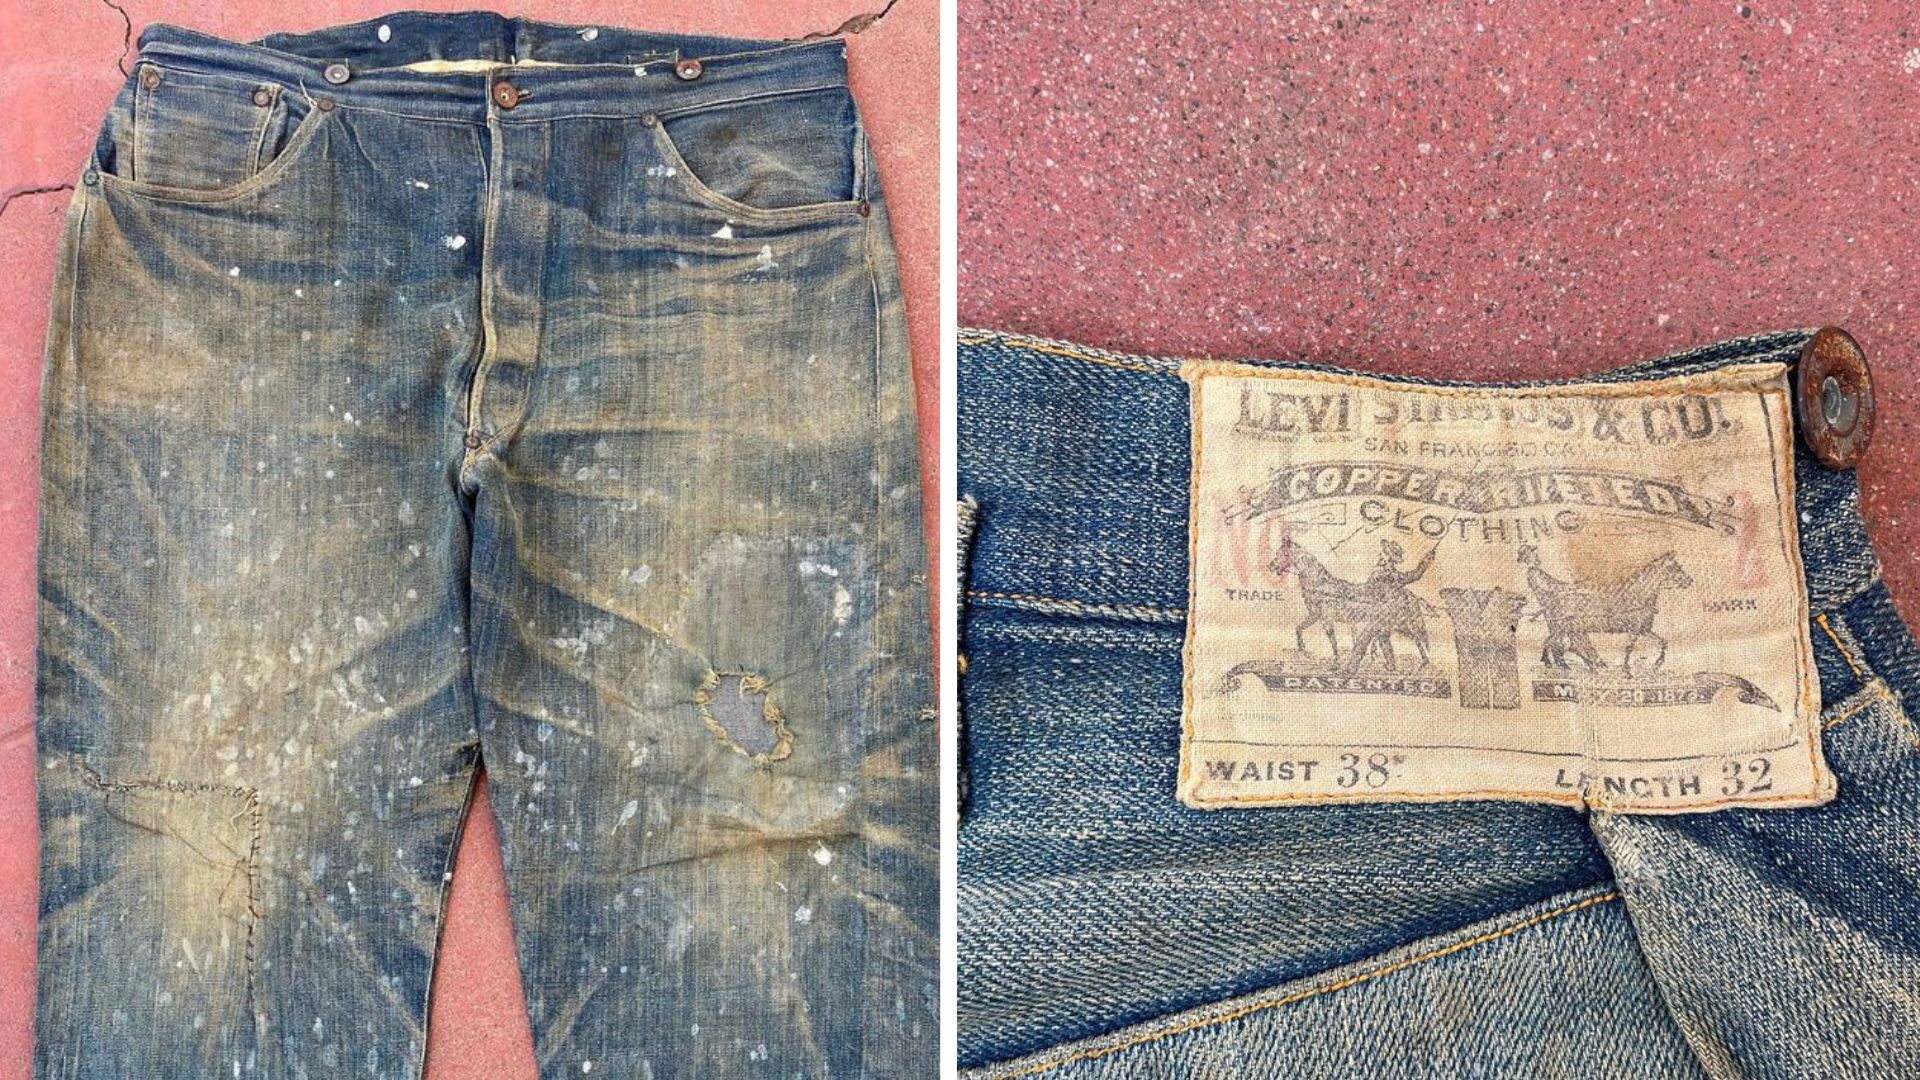 Levi's jeans from 1800s with racist slogan sell for over $120,000 -  National 